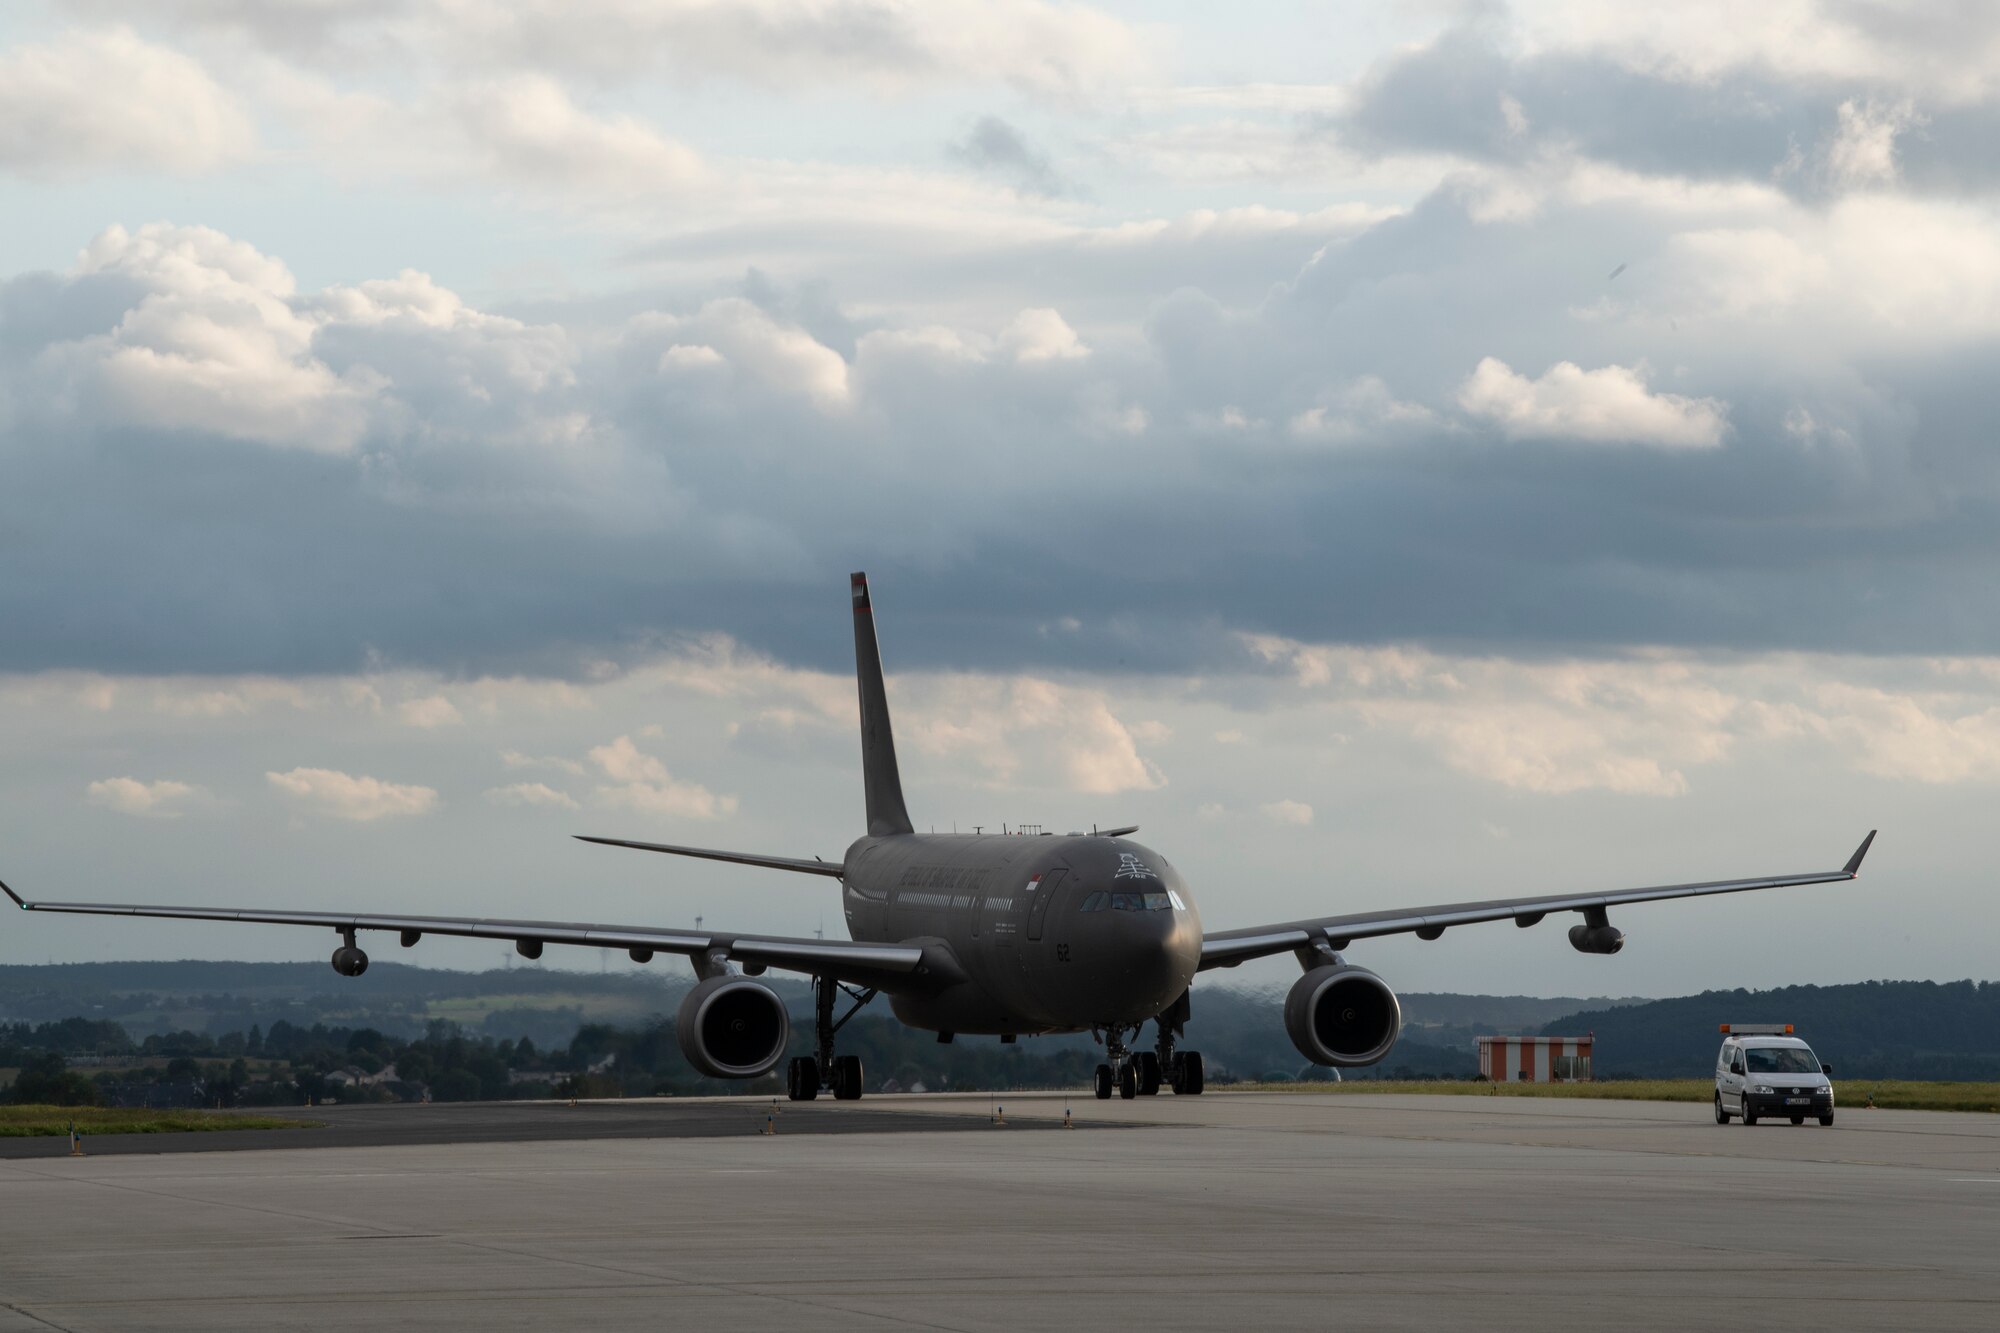 A Republic of Singapore Air Force A330 Multi-Role Tanker Transport aircraft taxis on the runway of Spangdahlem Air Base, Germany, Aug. 27, 2021.